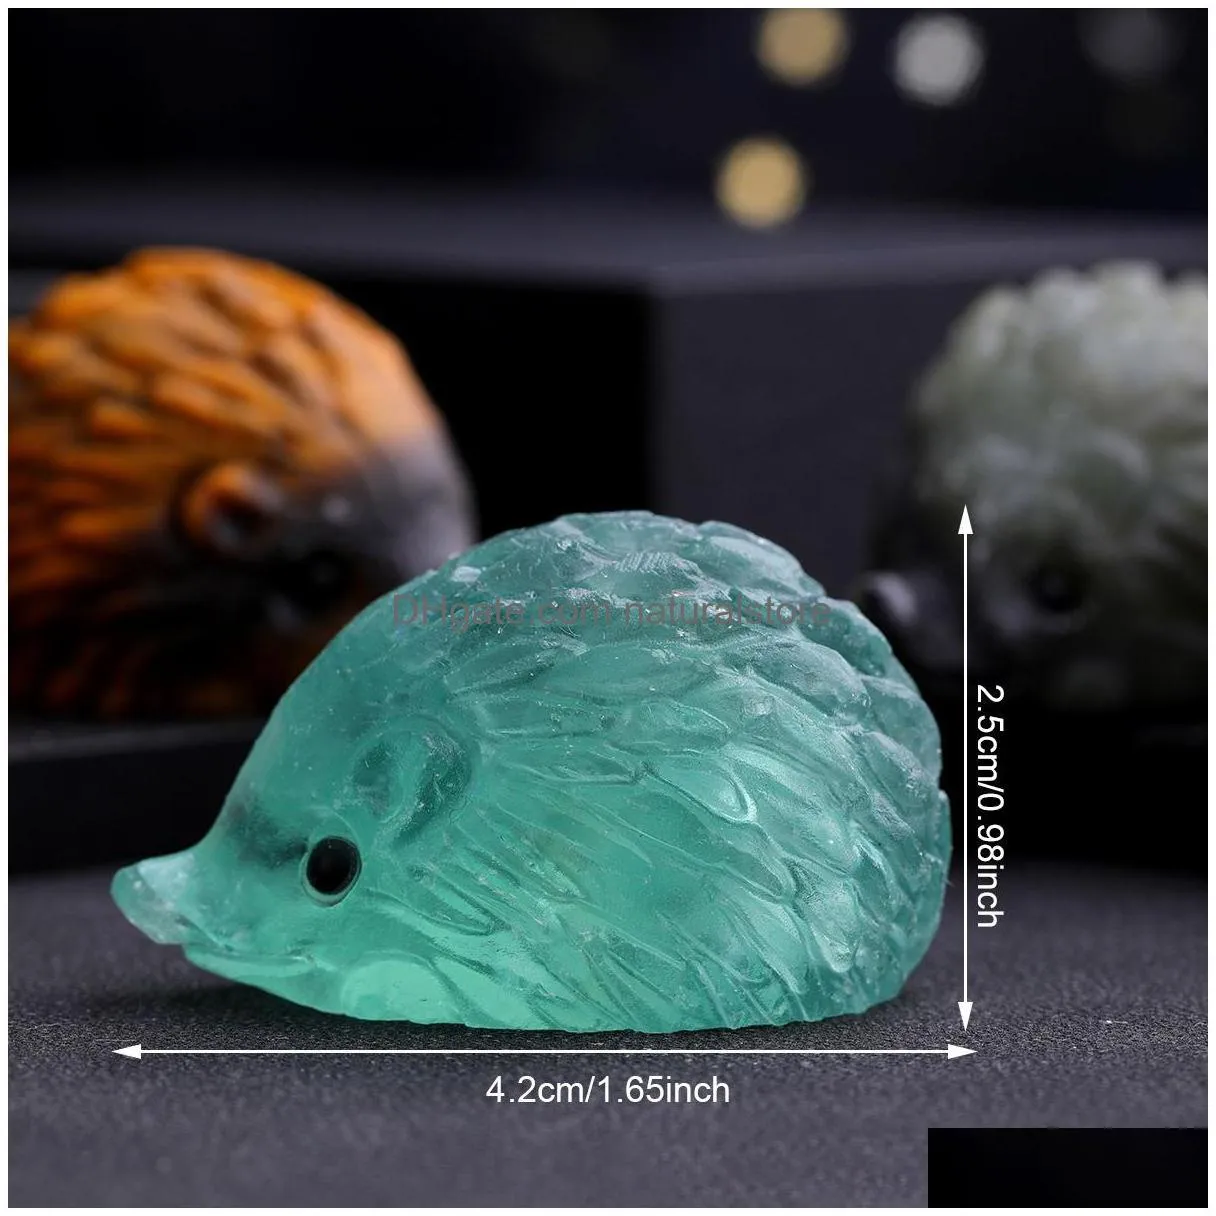 Stone Hedgehog Statue Natural Stone Fluorite Pink Quartz Crystal Healing Carved Stereoscopic Figurines Animal Crafts Home Drop Deliver Dhhex